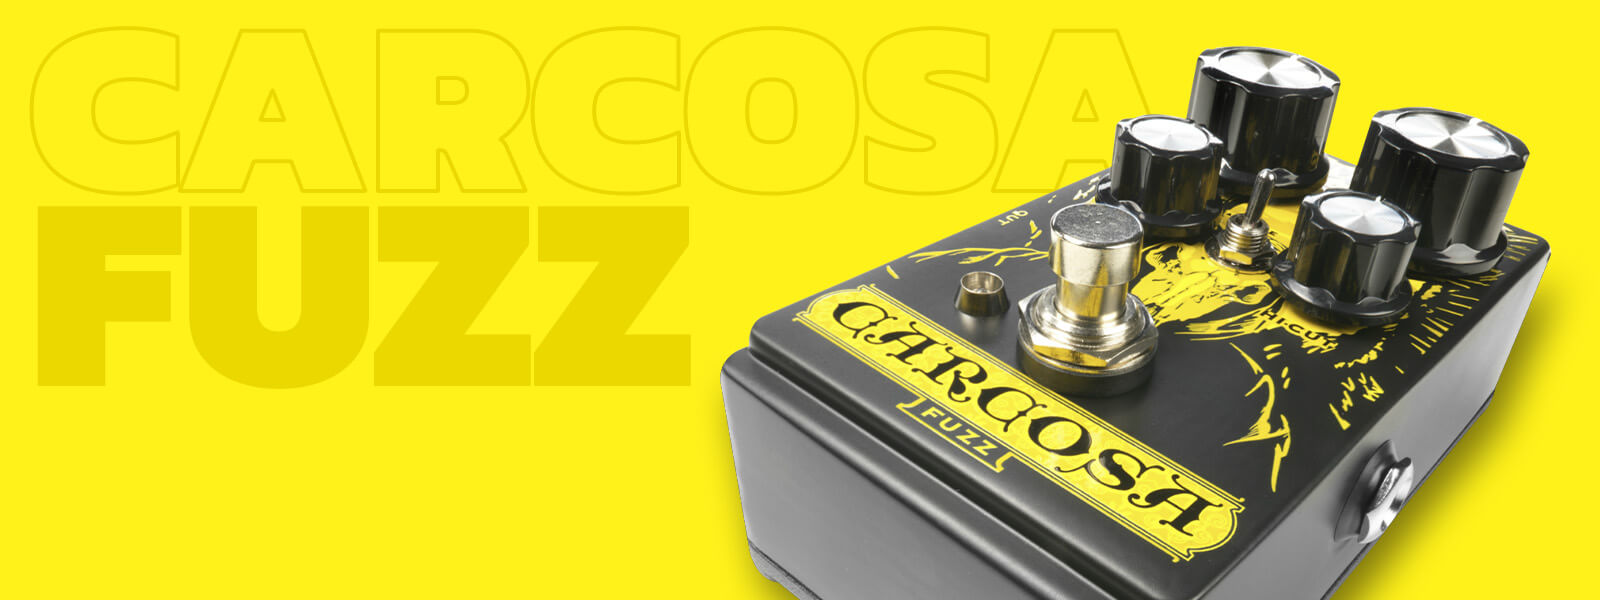 DOD Carcosa Fuzz analog fuzz guitar pedal in black with yellow graphics, yellow background and graphics that says 